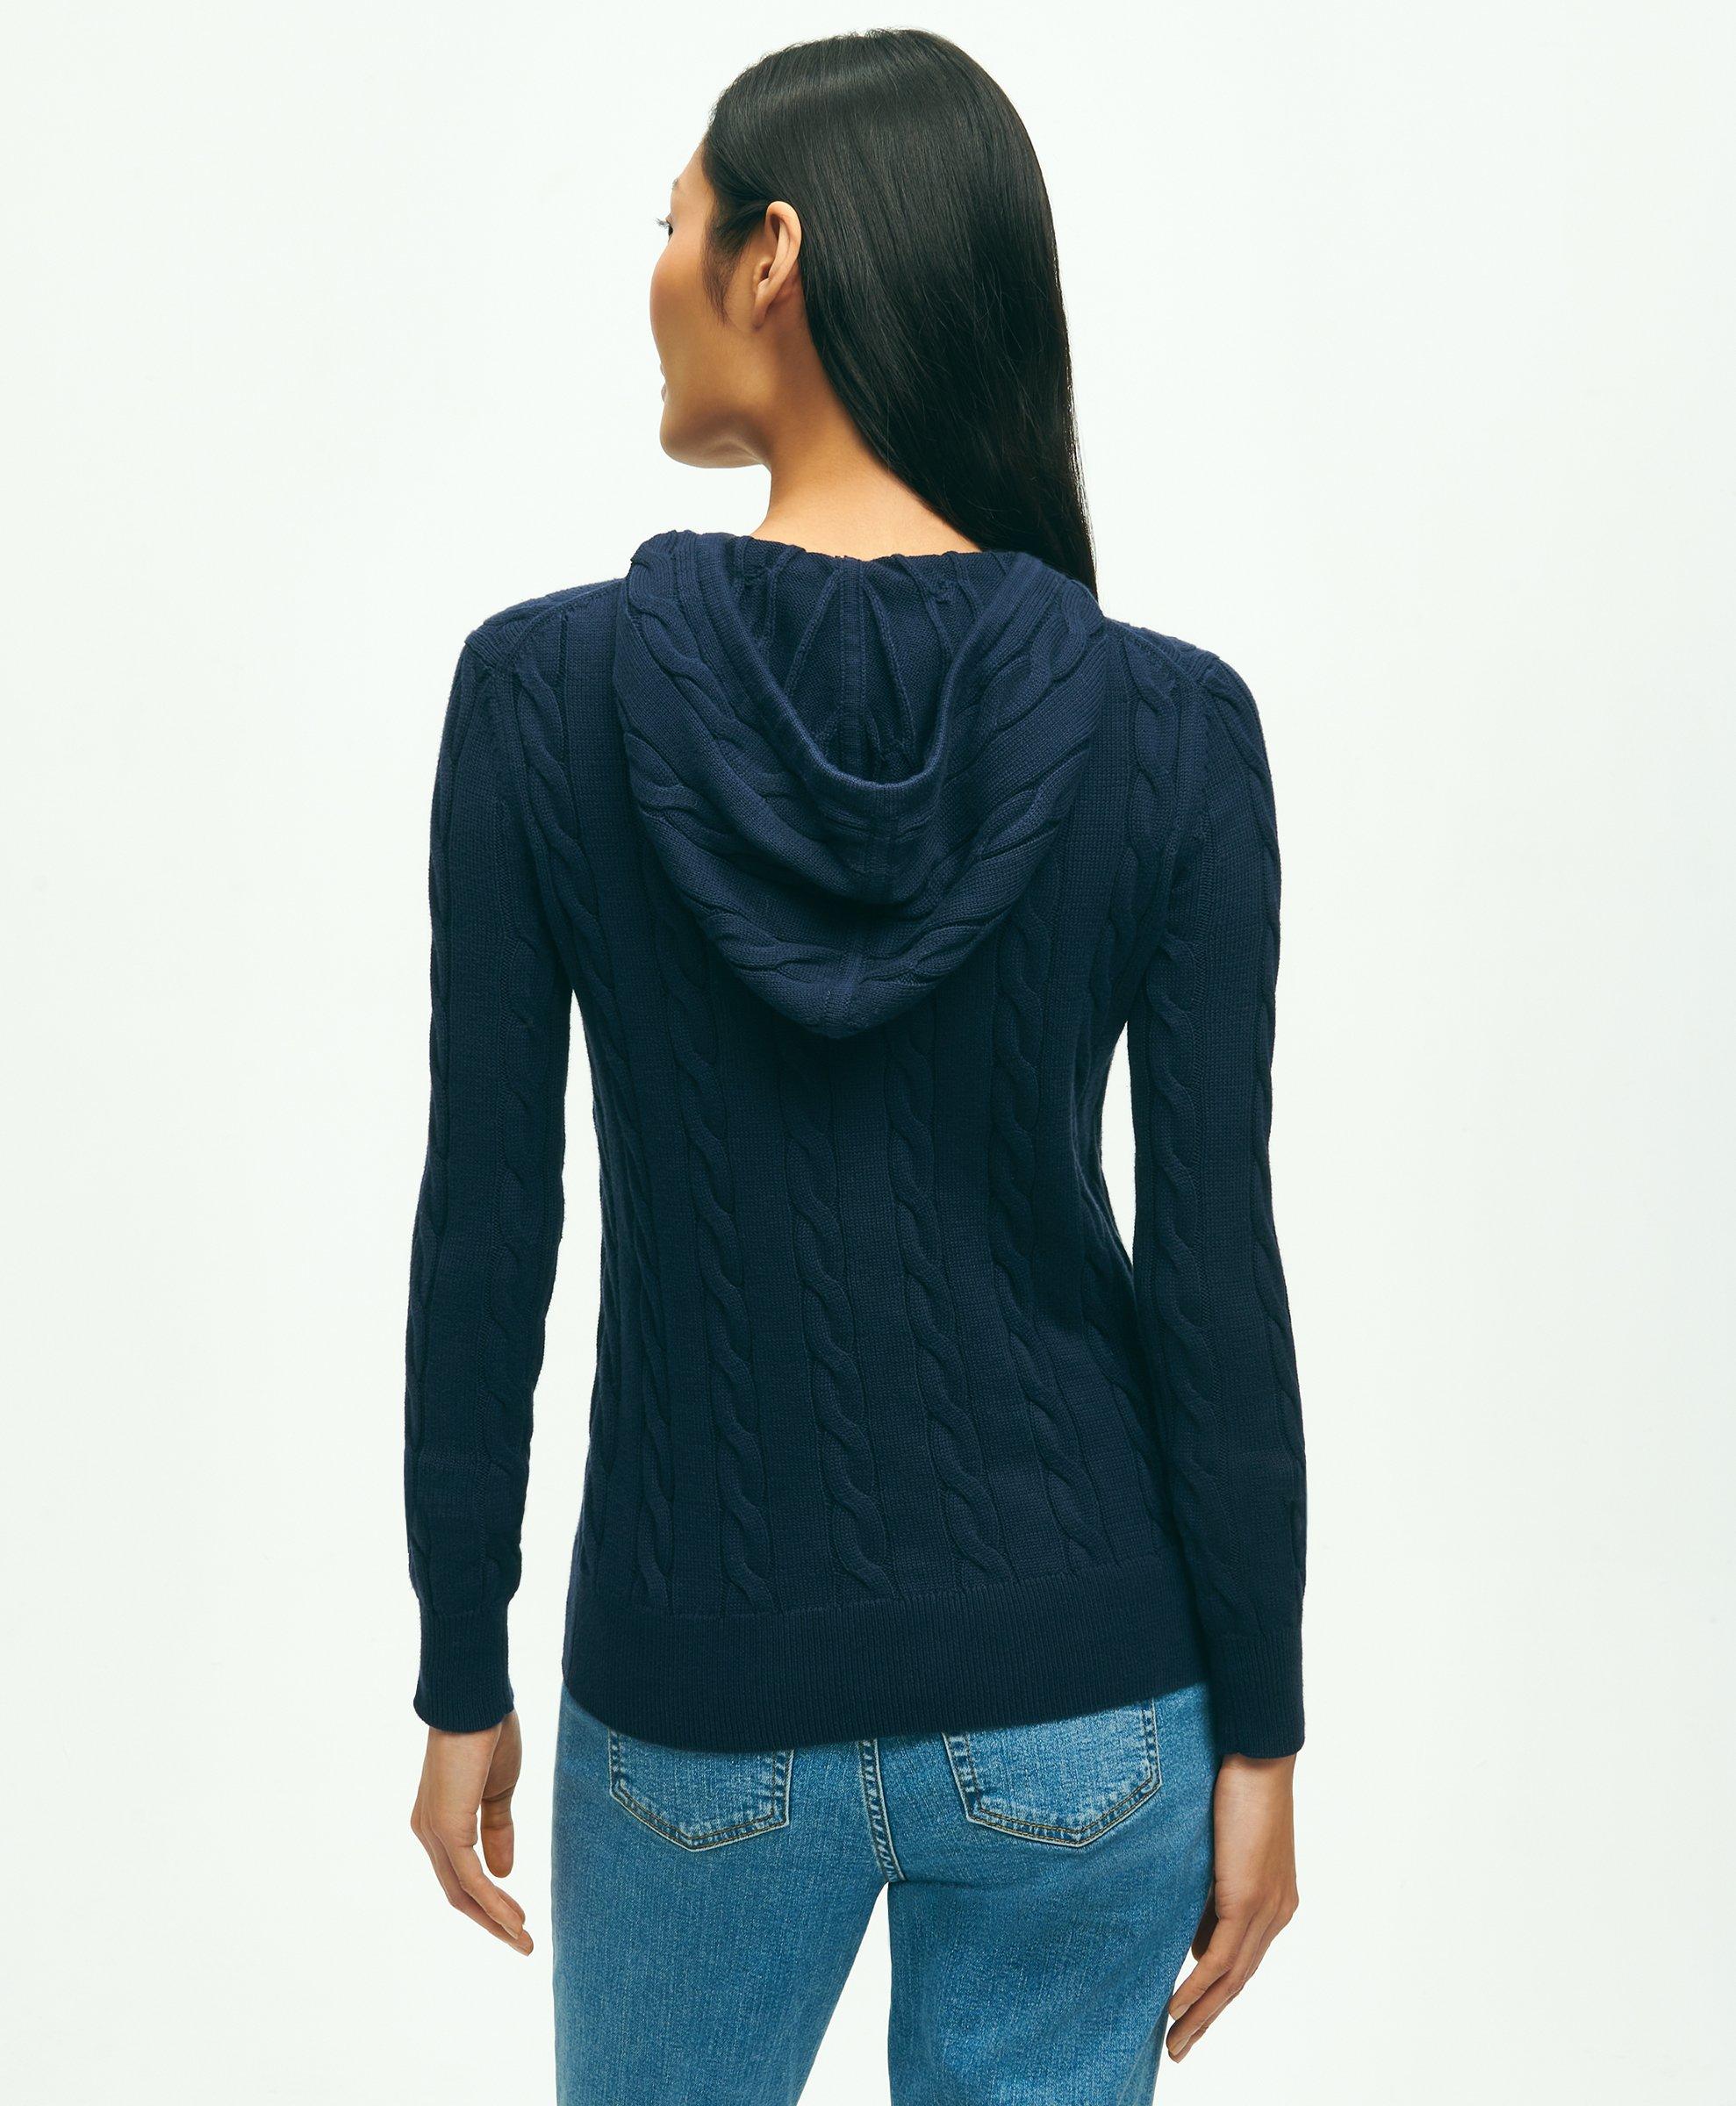 Cotton Cable-Knit Hoodie, image 2